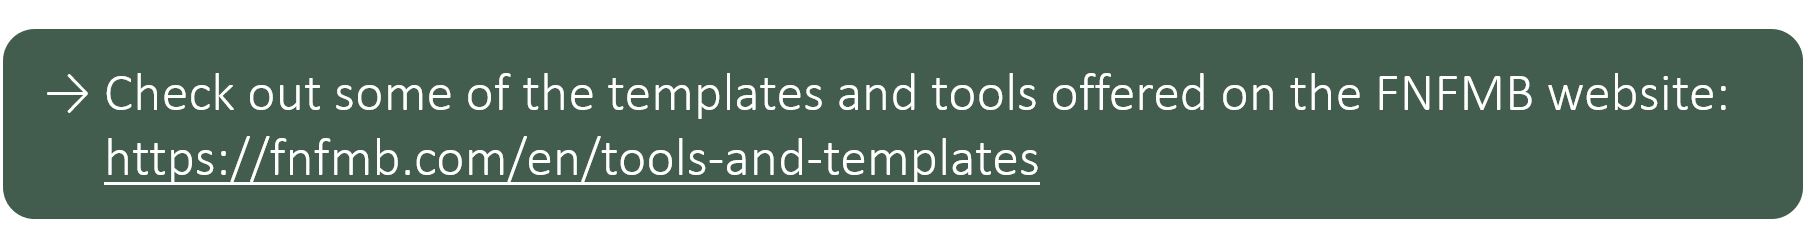 Check out some of the templates and tools offered on the FNFMB website: https://fnfmb.com/en/tools-and-templates